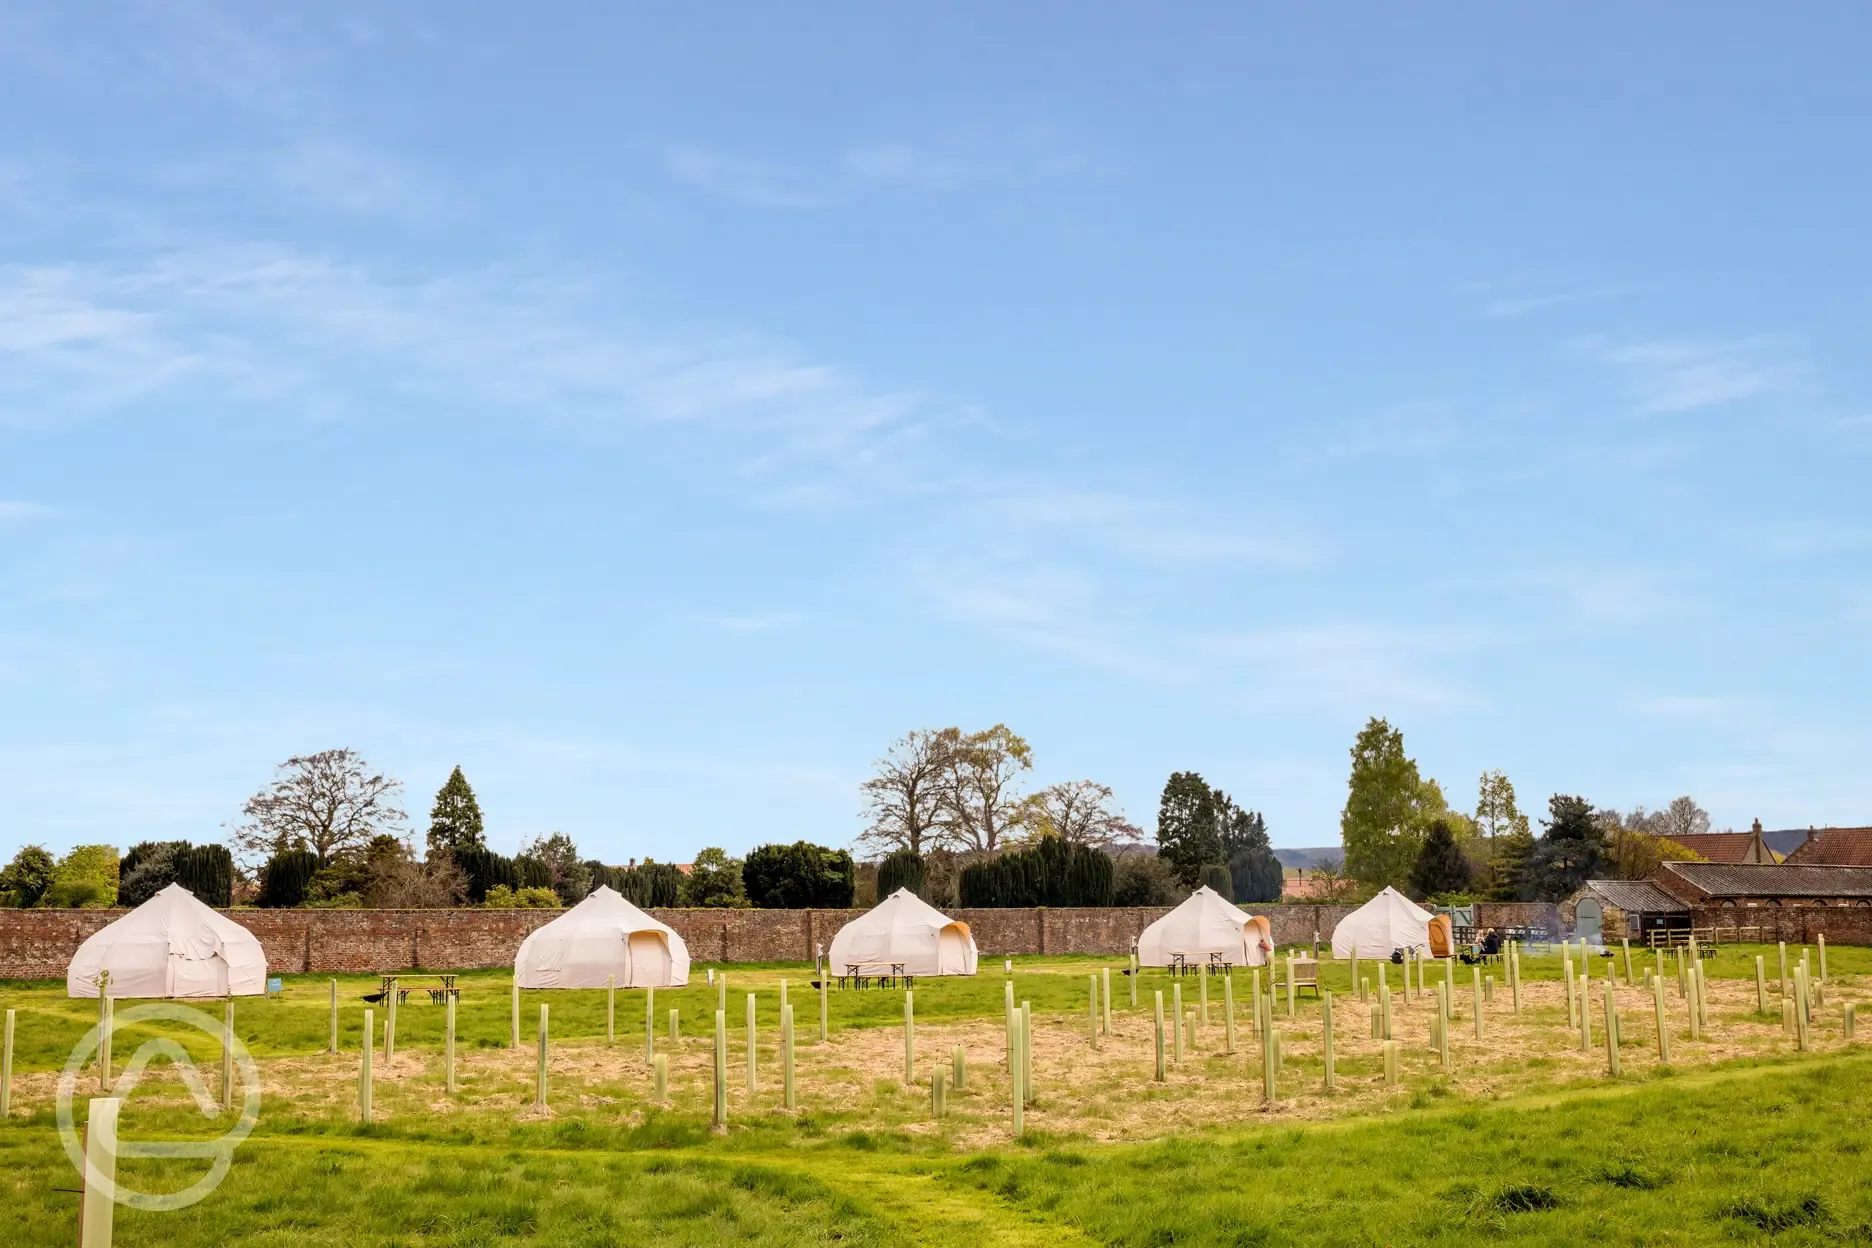 Two pet-friendly bell tents available